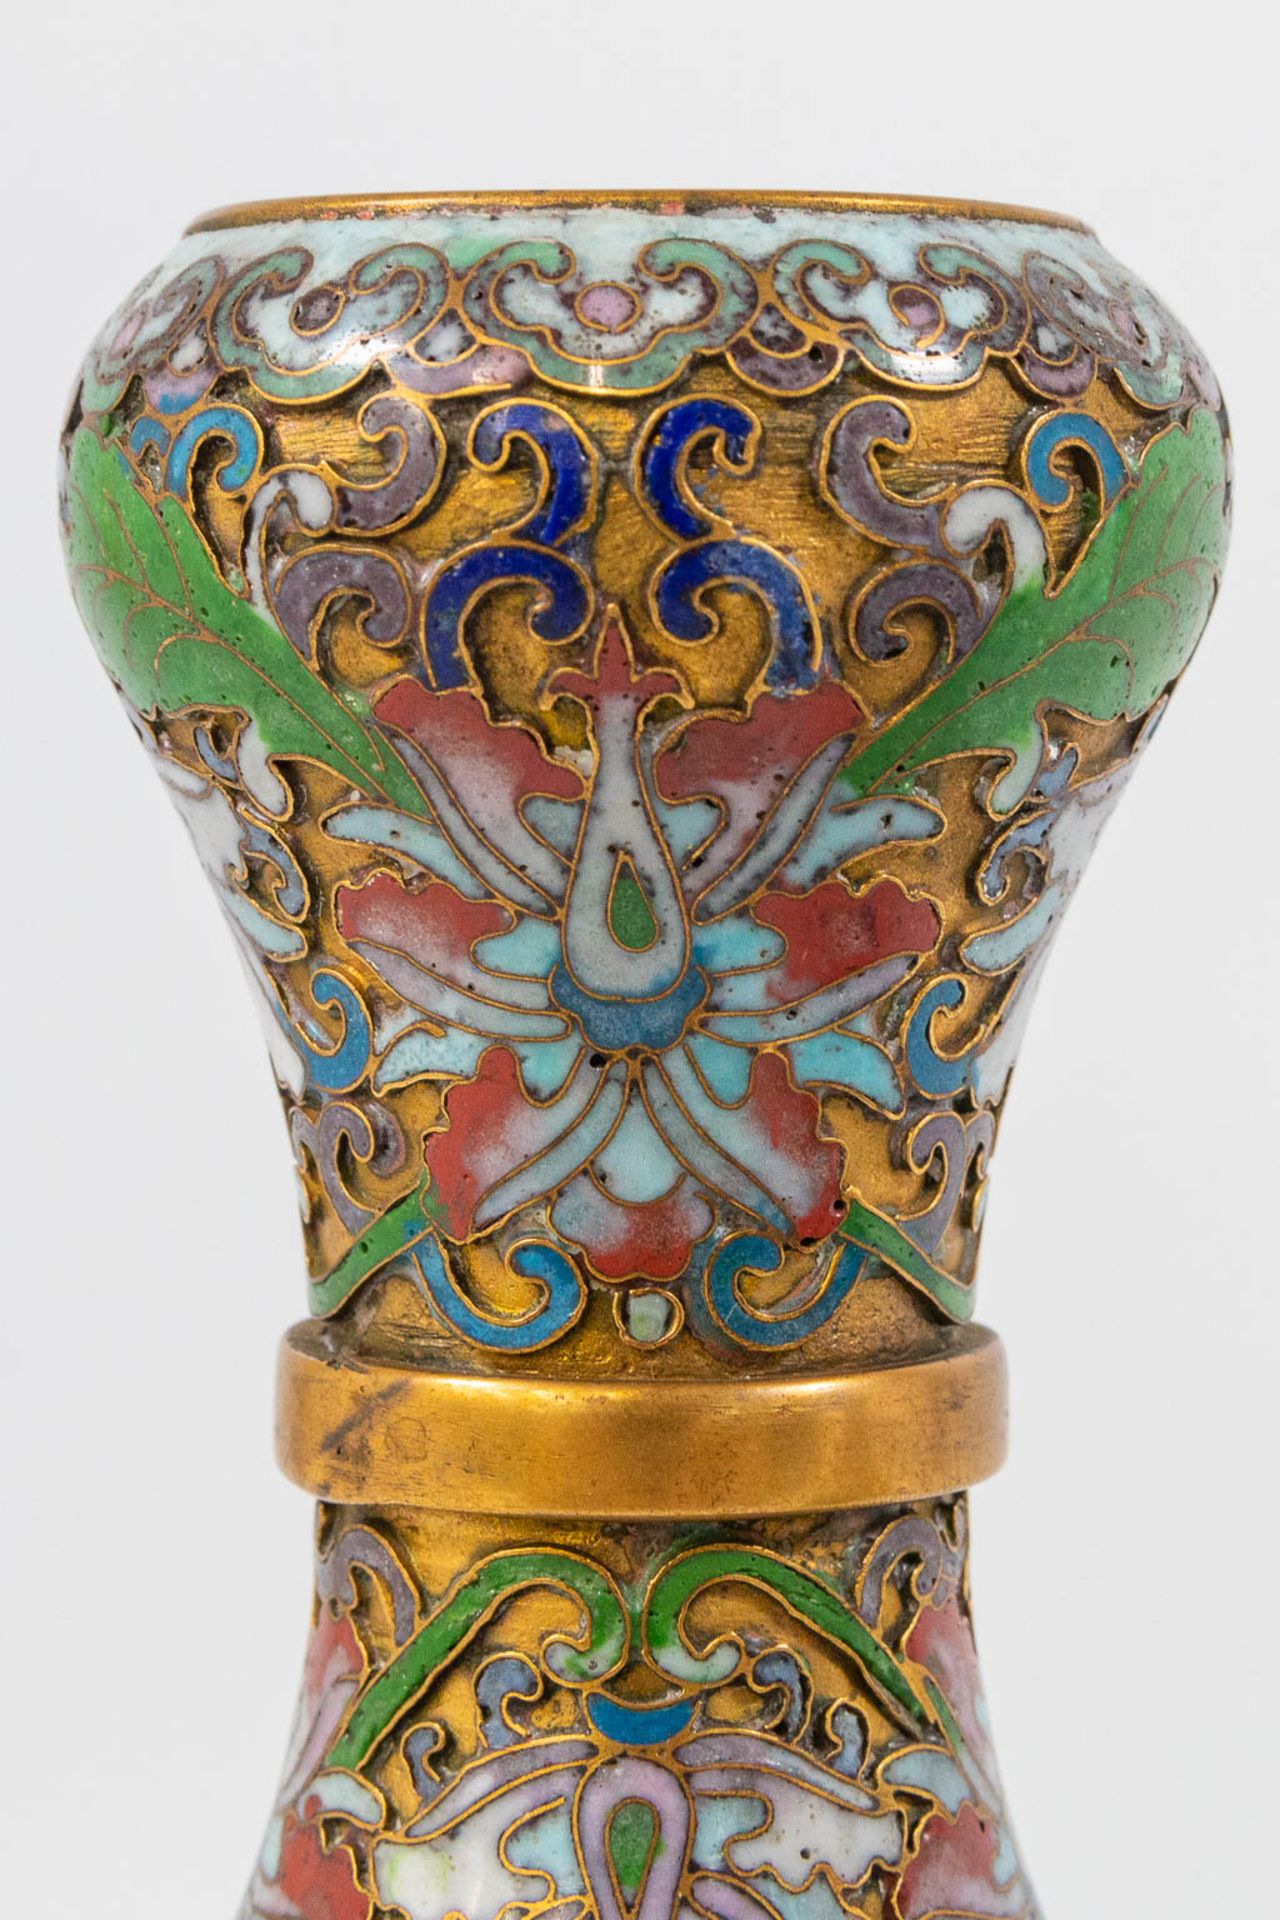 A pair of openworked Cloisonné vases, made of Bronze and enamel. - Image 14 of 17